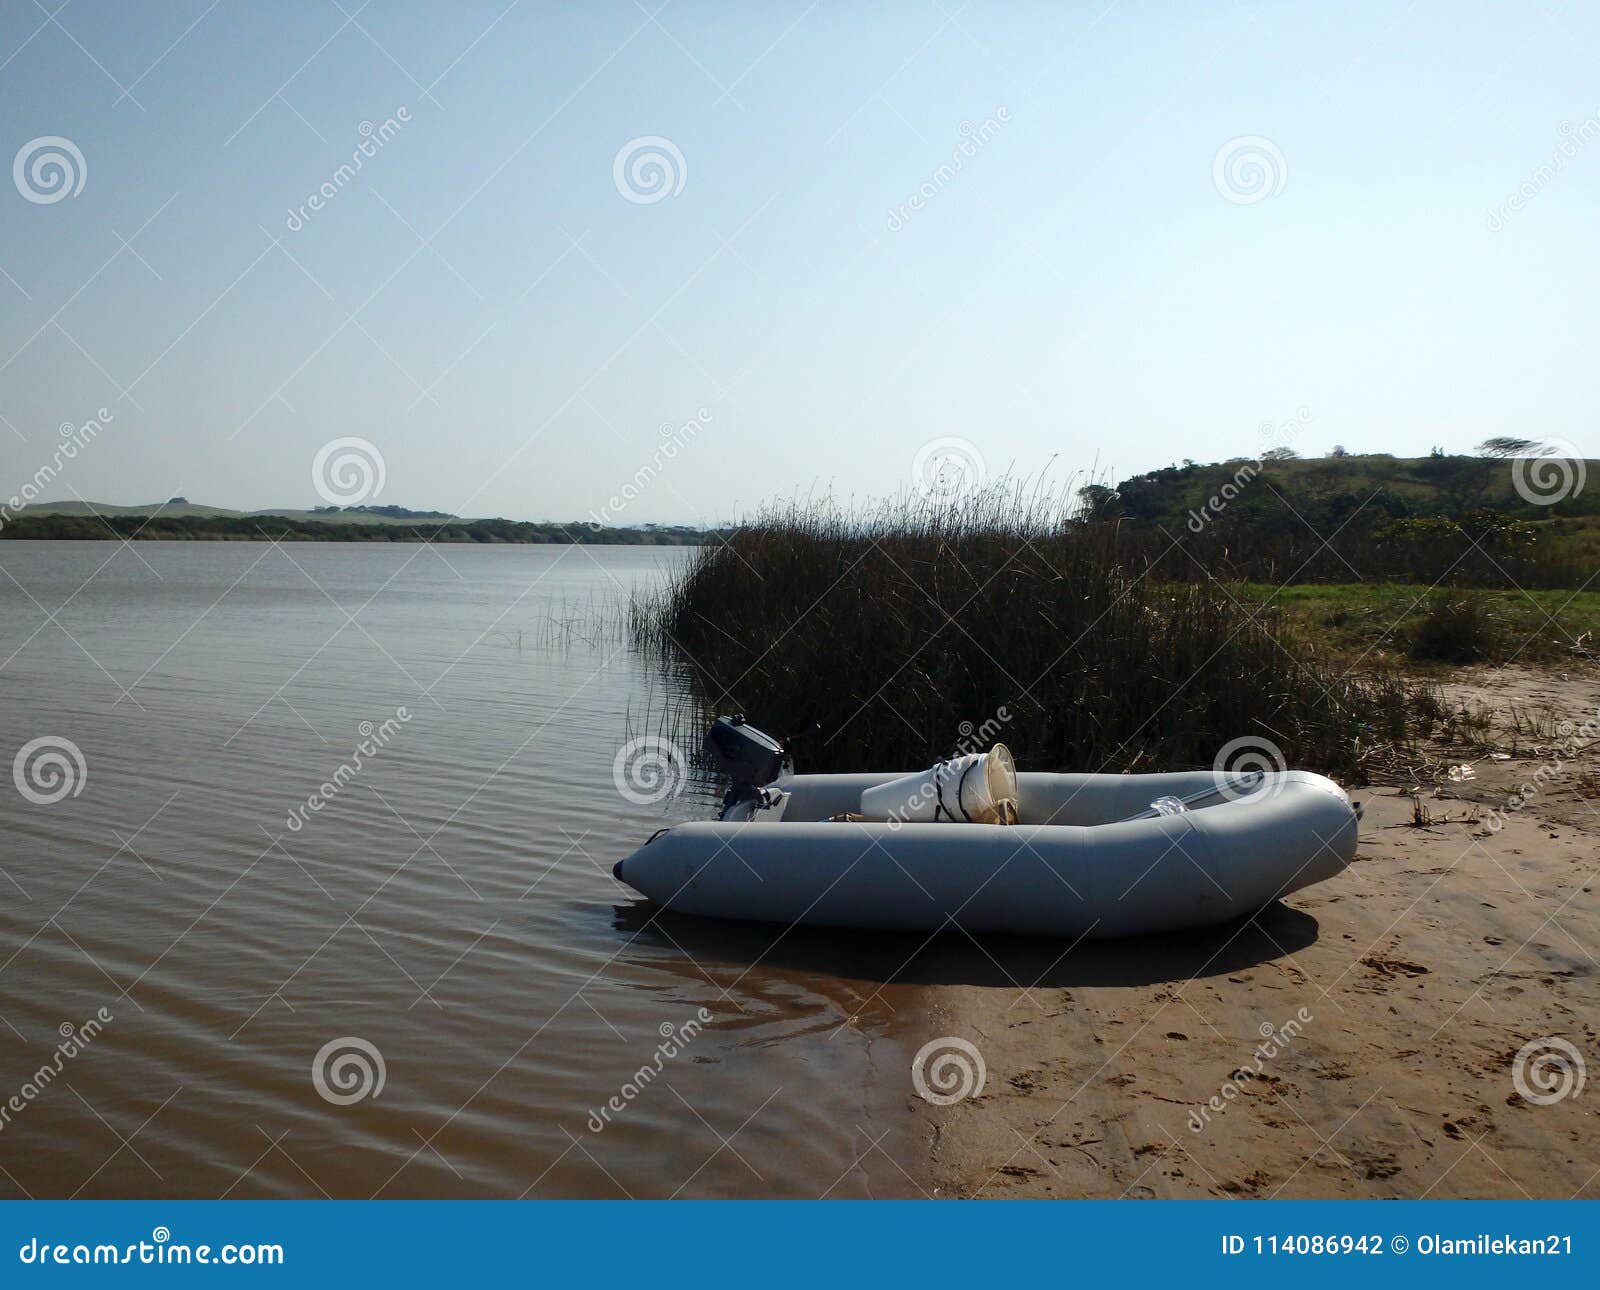 Inflatable boat on a river bank, ready to be launched into the river for a great adventure.